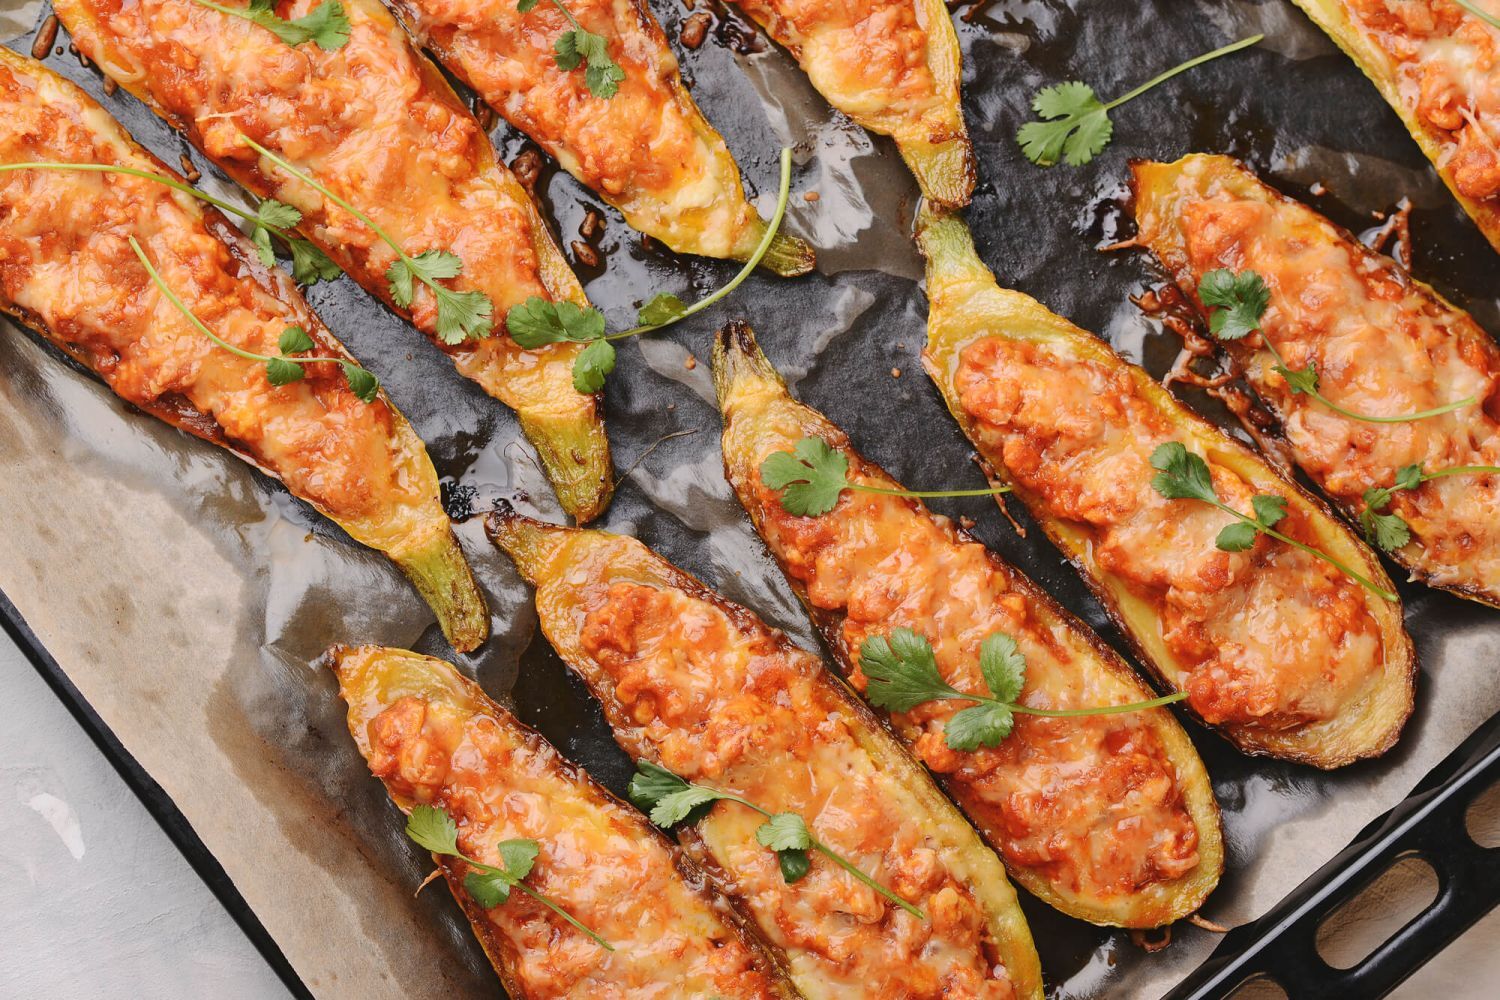 Chicken Parmesan zucchini boats with ground chicken, tomatoes, and melted cheese on a baking sheet.